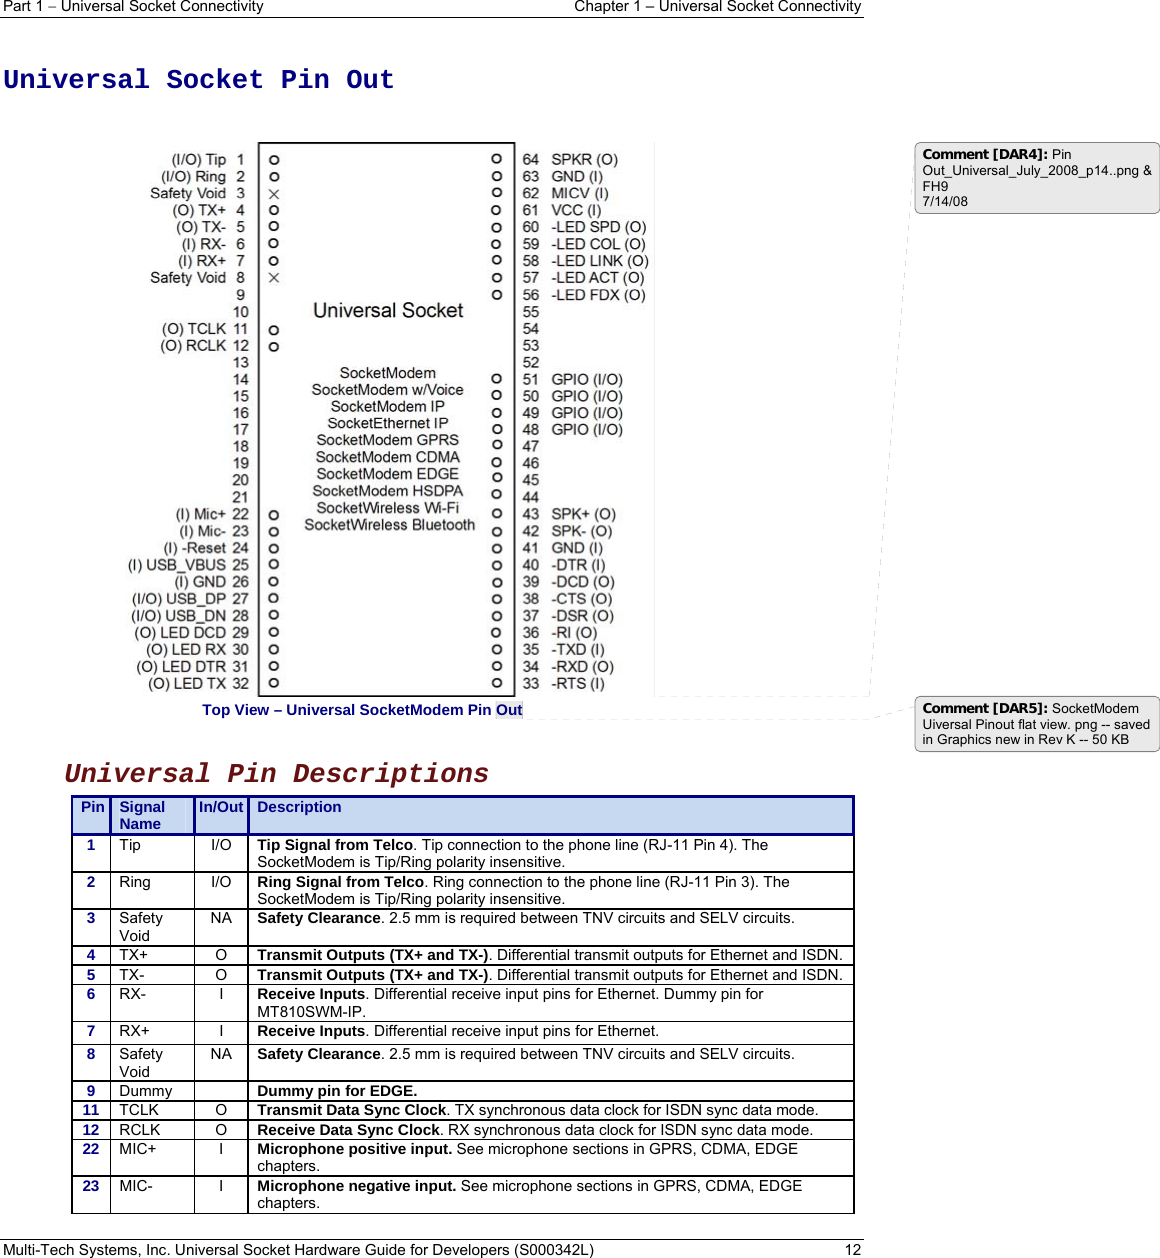 Part 1  Universal Socket Connectivity    Chapter 1 – Universal Socket Connectivity Multi-Tech Systems, Inc. Universal Socket Hardware Guide for Developers (S000342L)  12   Universal Socket Pin Out     Top View – Universal SocketModem Pin Out      Universal Pin Descriptions Pin  Signal Name  In/Out  Description 1  Tip I/O Tip Signal from Telco. Tip connection to the phone line (RJ-11 Pin 4). The SocketModem is Tip/Ring polarity insensitive. 2  Ring I/O Ring Signal from Telco. Ring connection to the phone line (RJ-11 Pin 3). The SocketModem is Tip/Ring polarity insensitive. 3  Safety Void NA  Safety Clearance. 2.5 mm is required between TNV circuits and SELV circuits. 4  TX+ O Transmit Outputs (TX+ and TX-). Differential transmit outputs for Ethernet and ISDN.  5  TX- O Transmit Outputs (TX+ and TX-). Differential transmit outputs for Ethernet and ISDN.  6  RX-   I  Receive Inputs. Differential receive input pins for Ethernet. Dummy pin for MT810SWM-IP. 7  RX+   I  Receive Inputs. Differential receive input pins for Ethernet. 8  Safety Void NA  Safety Clearance. 2.5 mm is required between TNV circuits and SELV circuits. 9  Dummy  Dummy pin for EDGE. 11  TCLK O Transmit Data Sync Clock. TX synchronous data clock for ISDN sync data mode. 12  RCLK O Receive Data Sync Clock. RX synchronous data clock for ISDN sync data mode. 22  MIC+ I Microphone positive input. See microphone sections in GPRS, CDMA, EDGE chapters. 23 MIC-  I  Microphone negative input. See microphone sections in GPRS, CDMA, EDGE chapters.  Comment [DAR4]: Pin Out_Universal_July_2008_p14..png &amp; FH9 7/14/08 Comment [DAR5]: SocketModem Uiversal Pinout flat view. png -- saved in Graphics new in Rev K -- 50 KB 